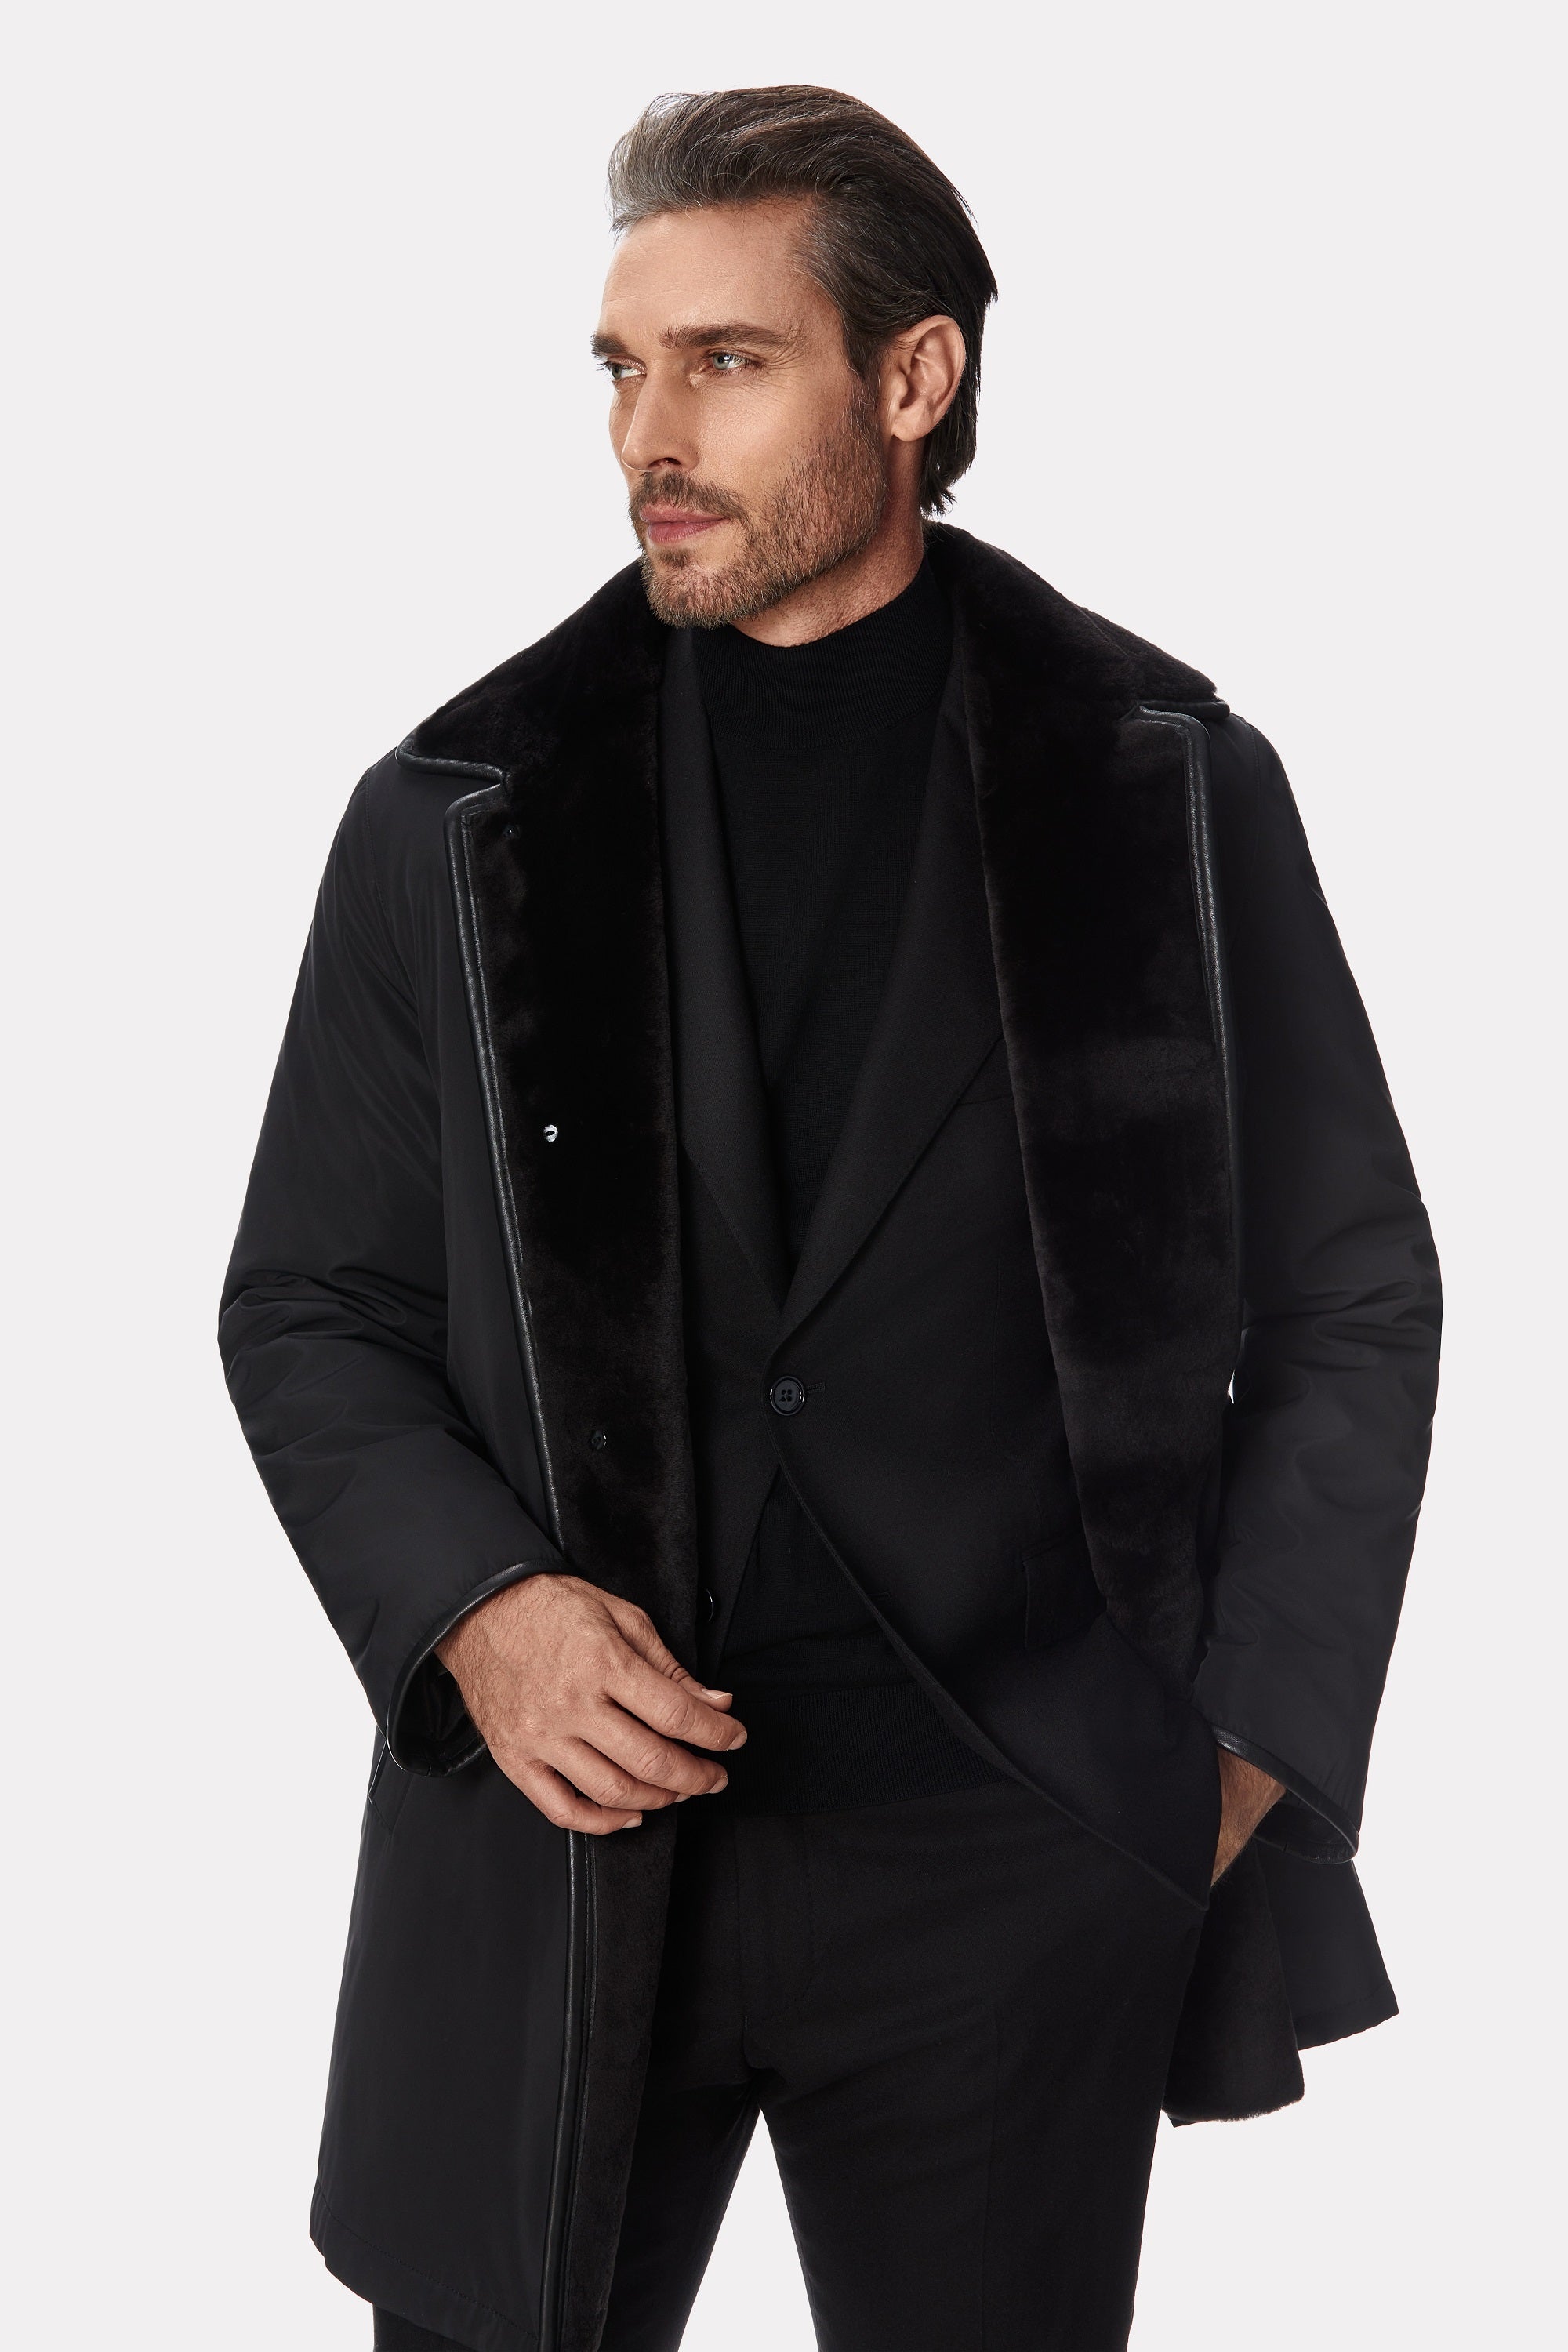 Black coat with shearling interior